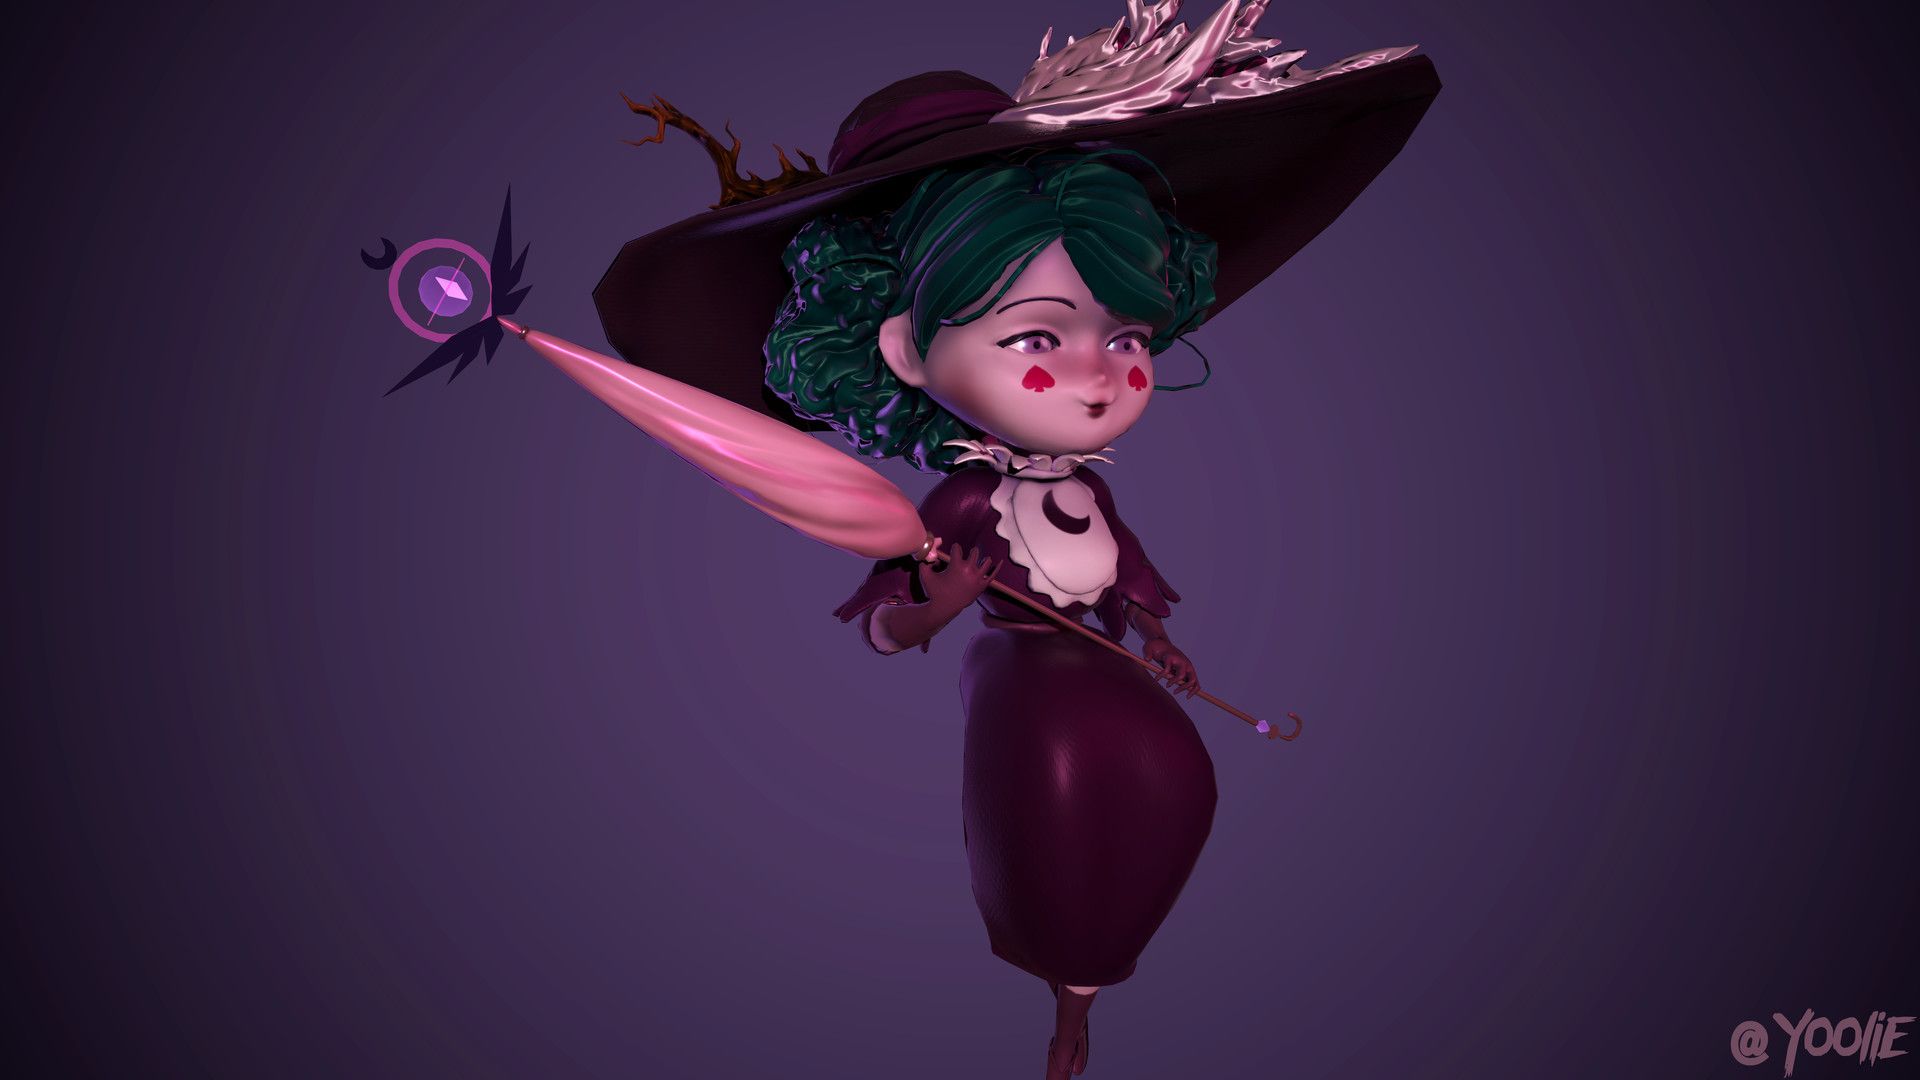 Eclipsa 3D Fan Art from Star and the Forces of Evil